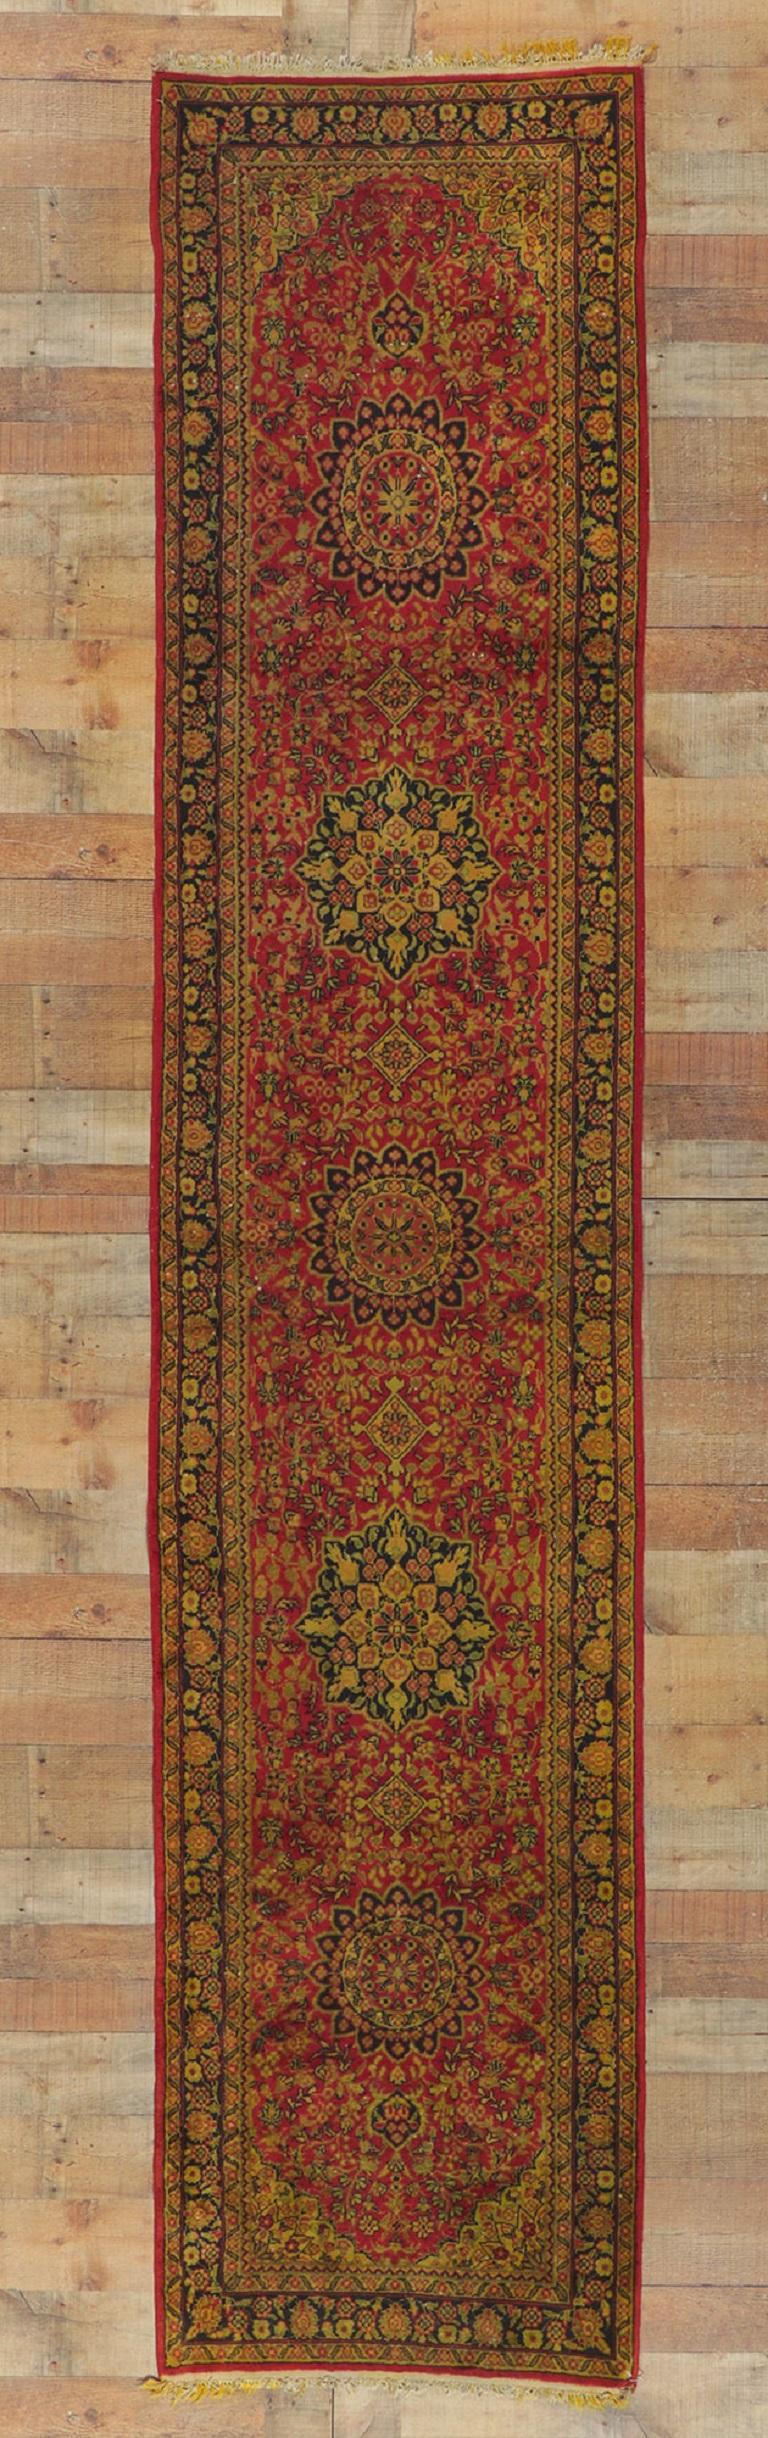 Vintage Turkish Runner, Sophisticated Elegance Meets Timeless Appeal In Good Condition For Sale In Dallas, TX